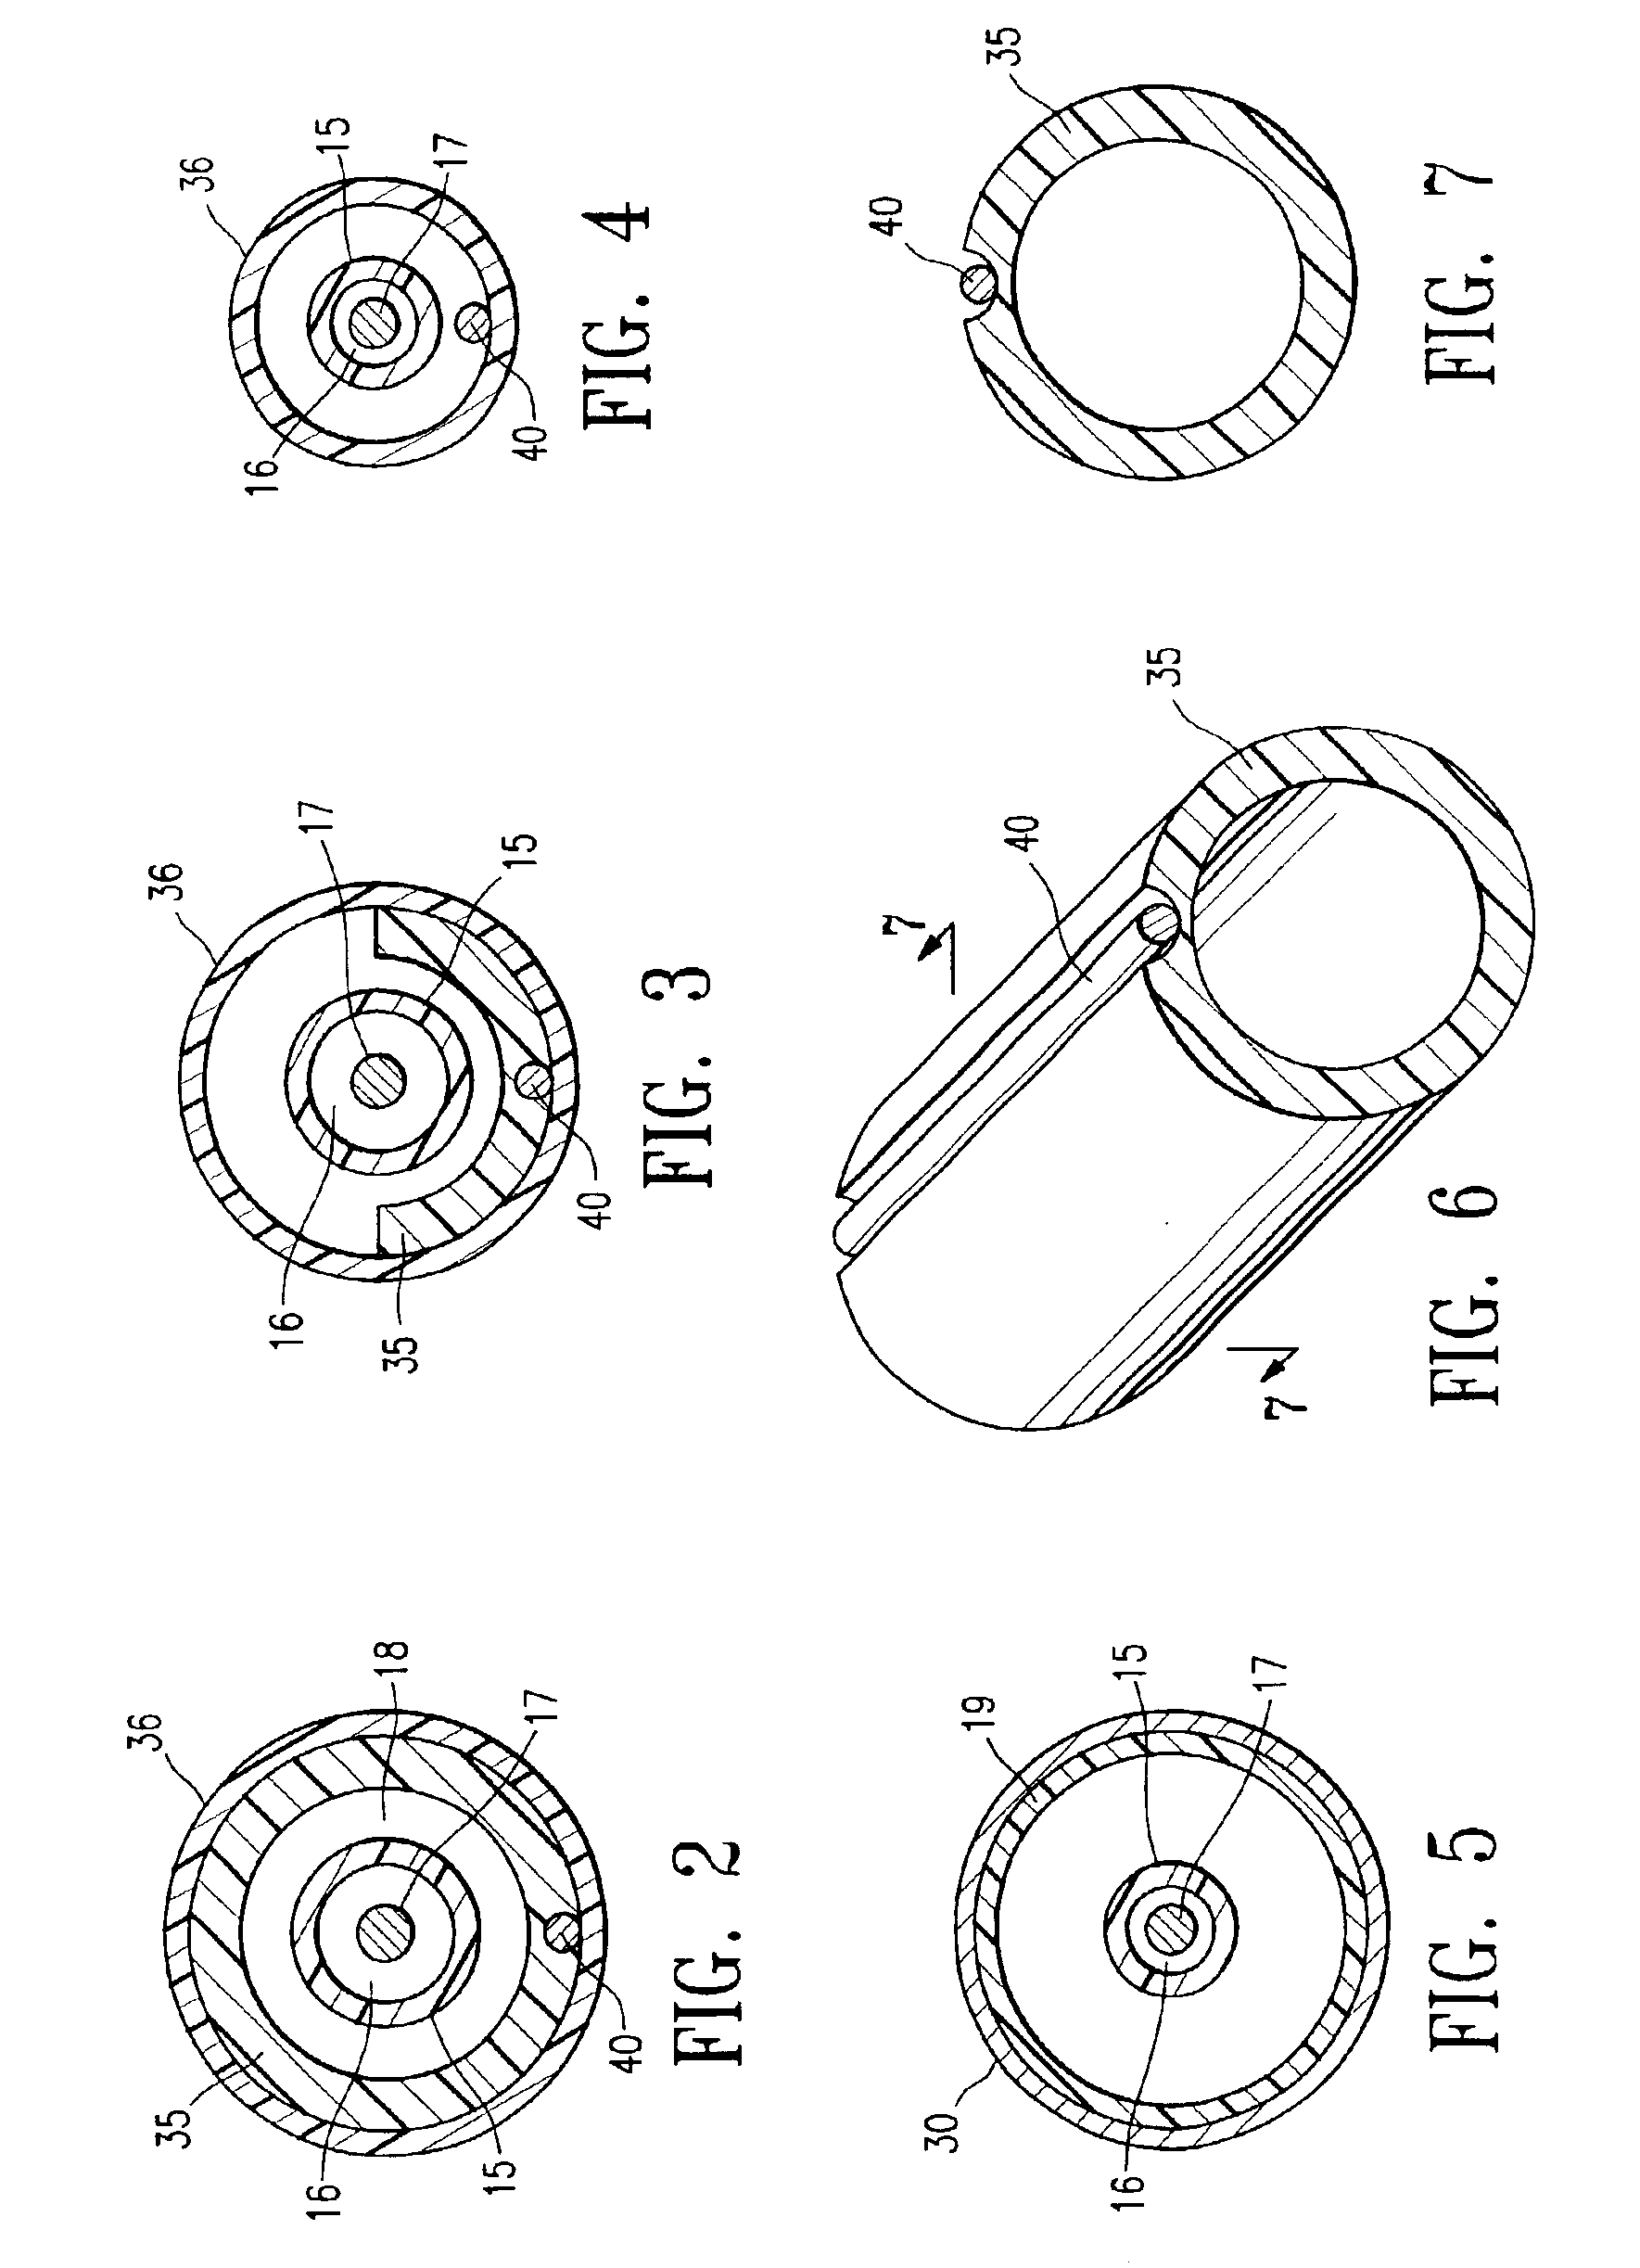 Catheter having a multilayered shaft section with a reinforcing mandrel